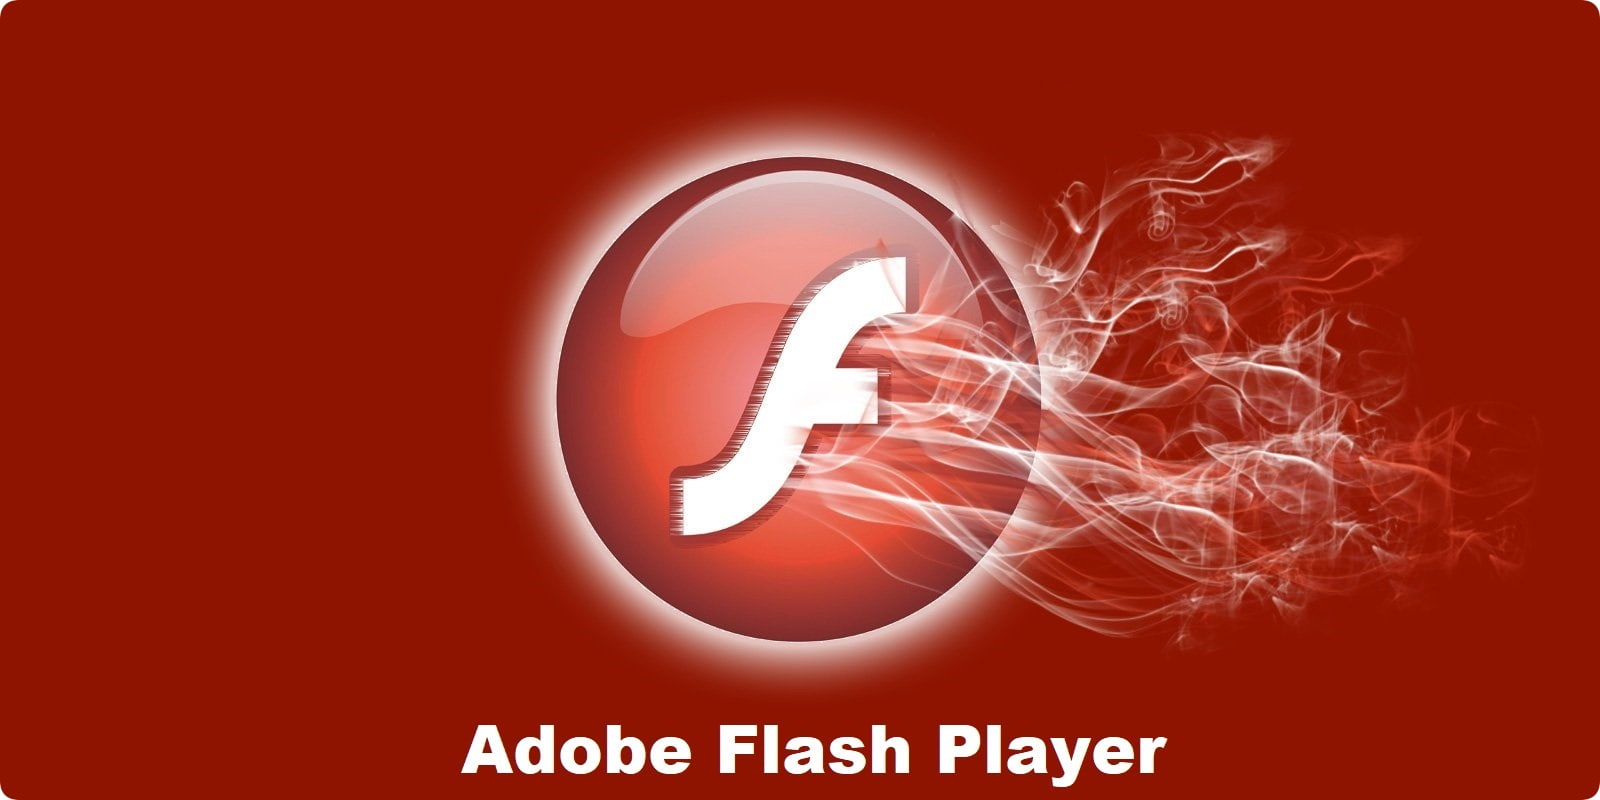 Flash Player is computer software that runs multimedia content.